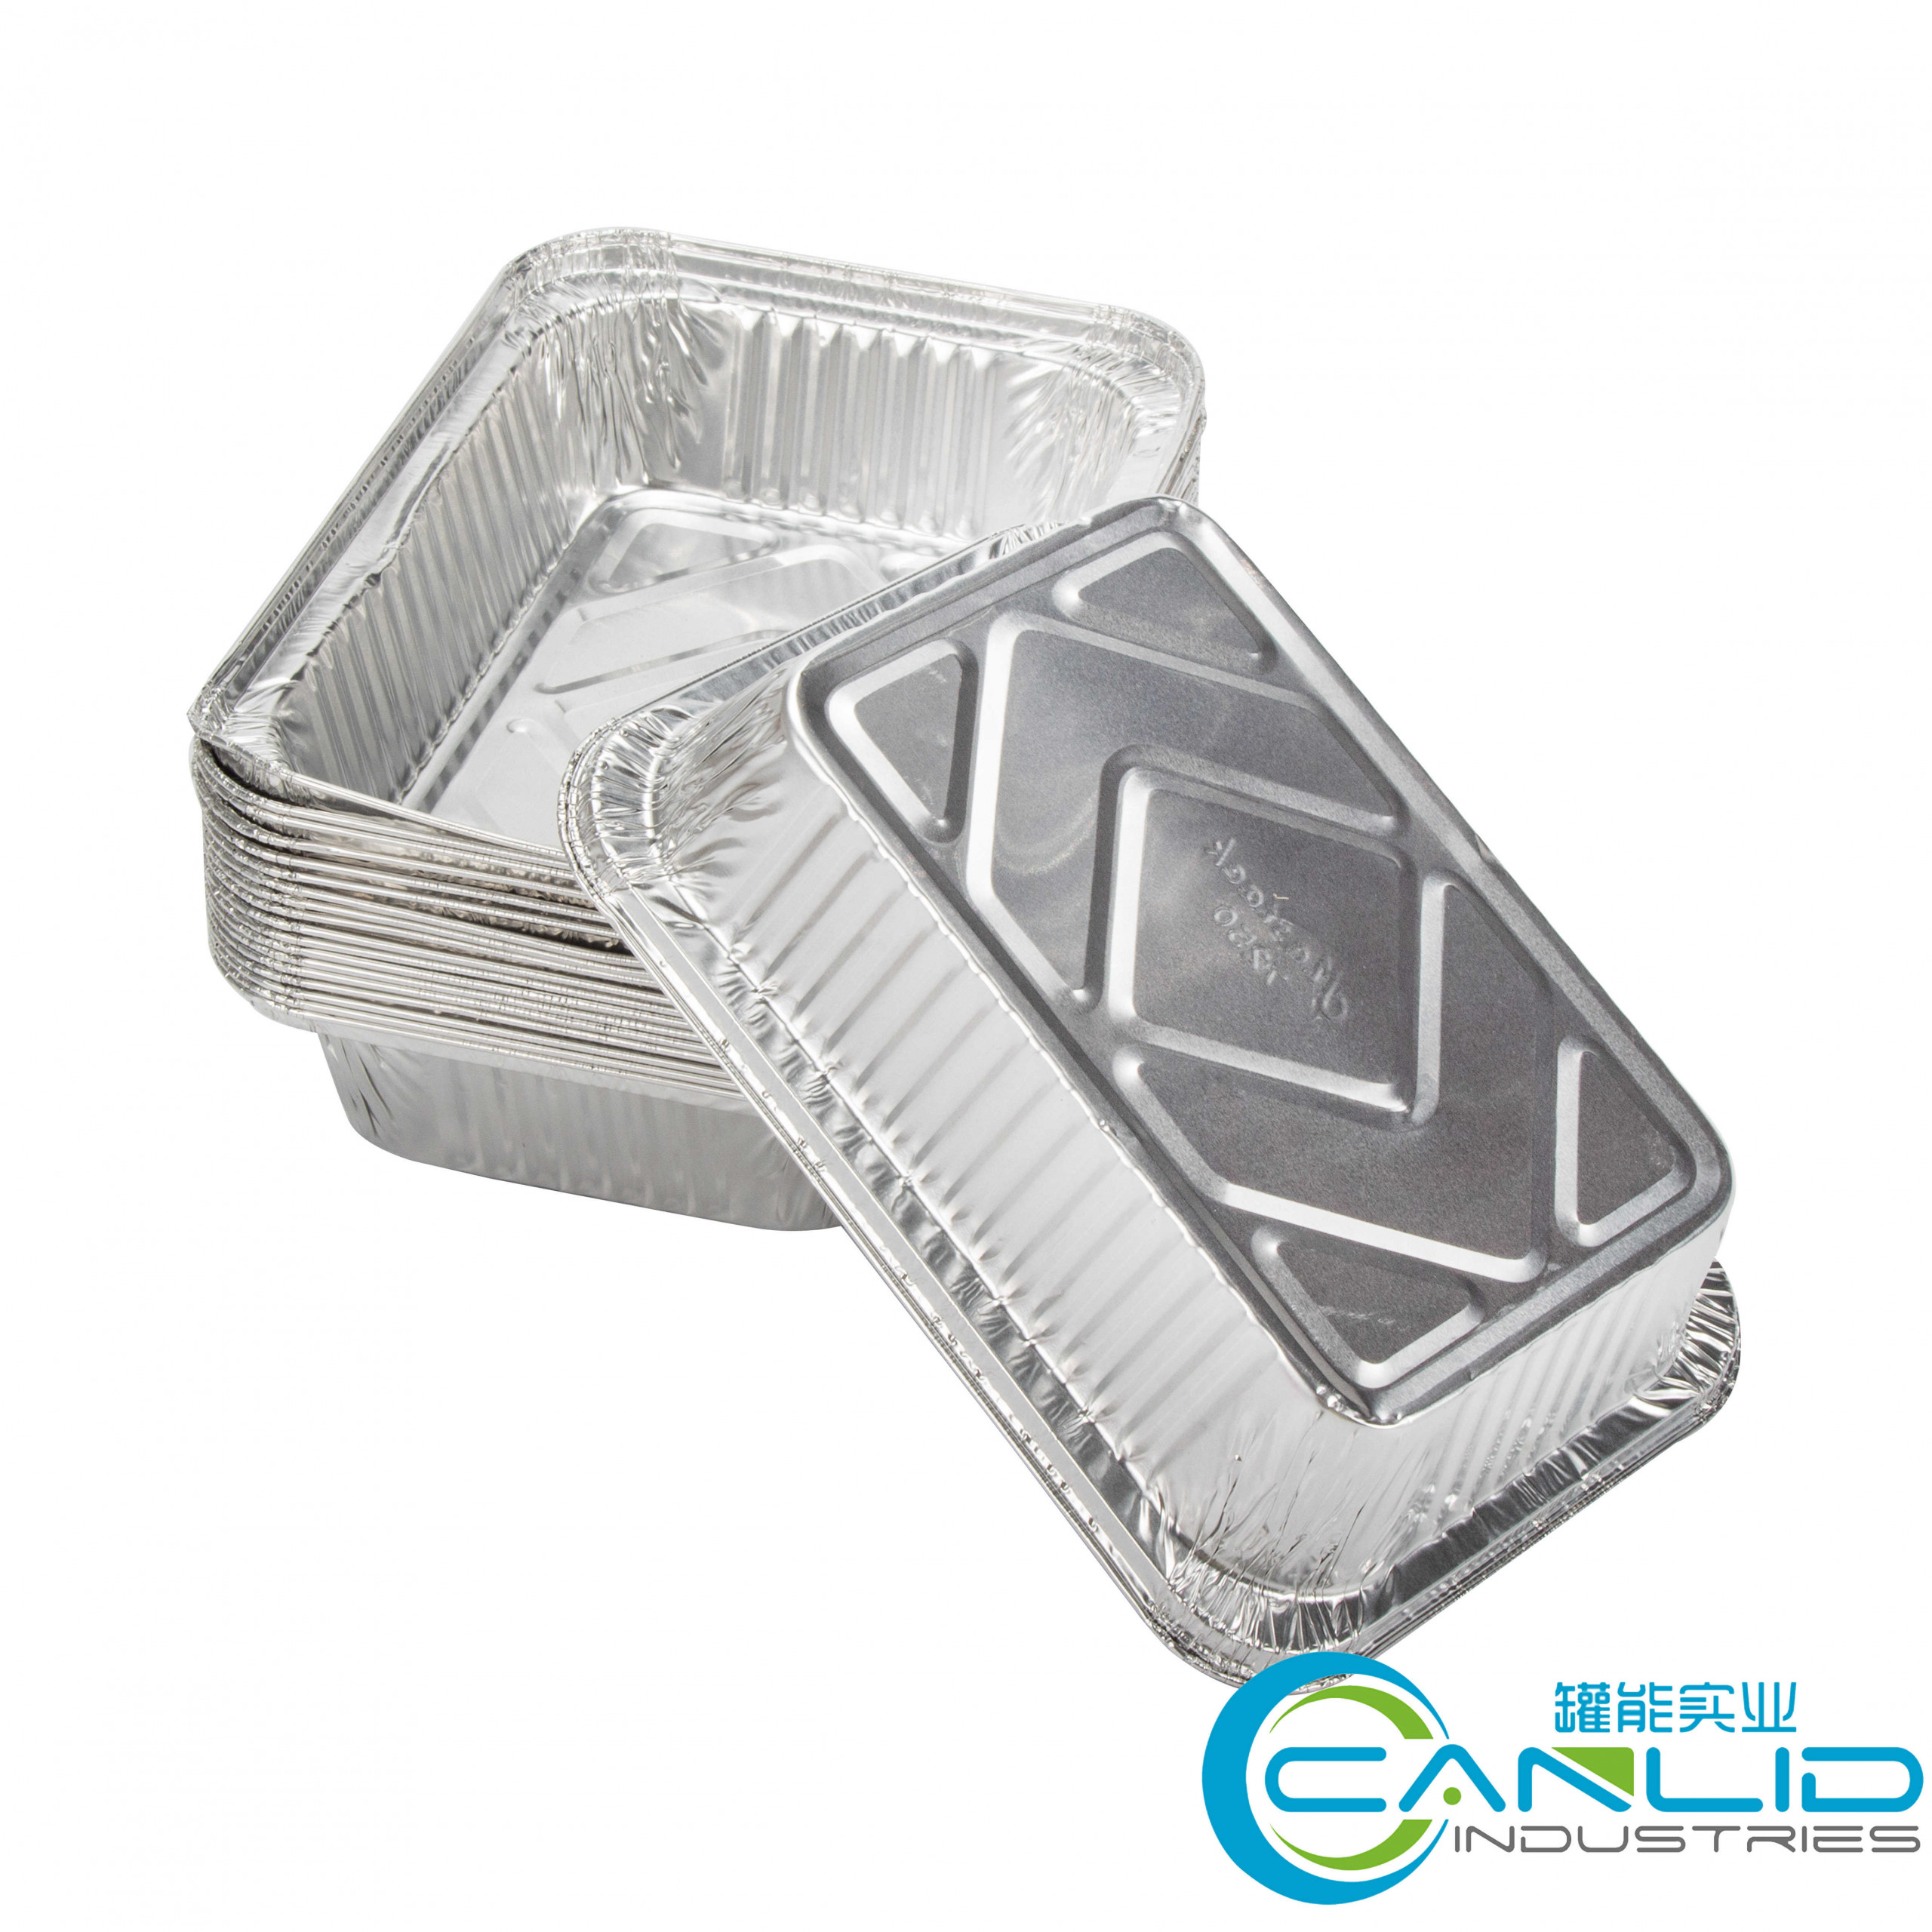 Aluminum Silver Foil Containers